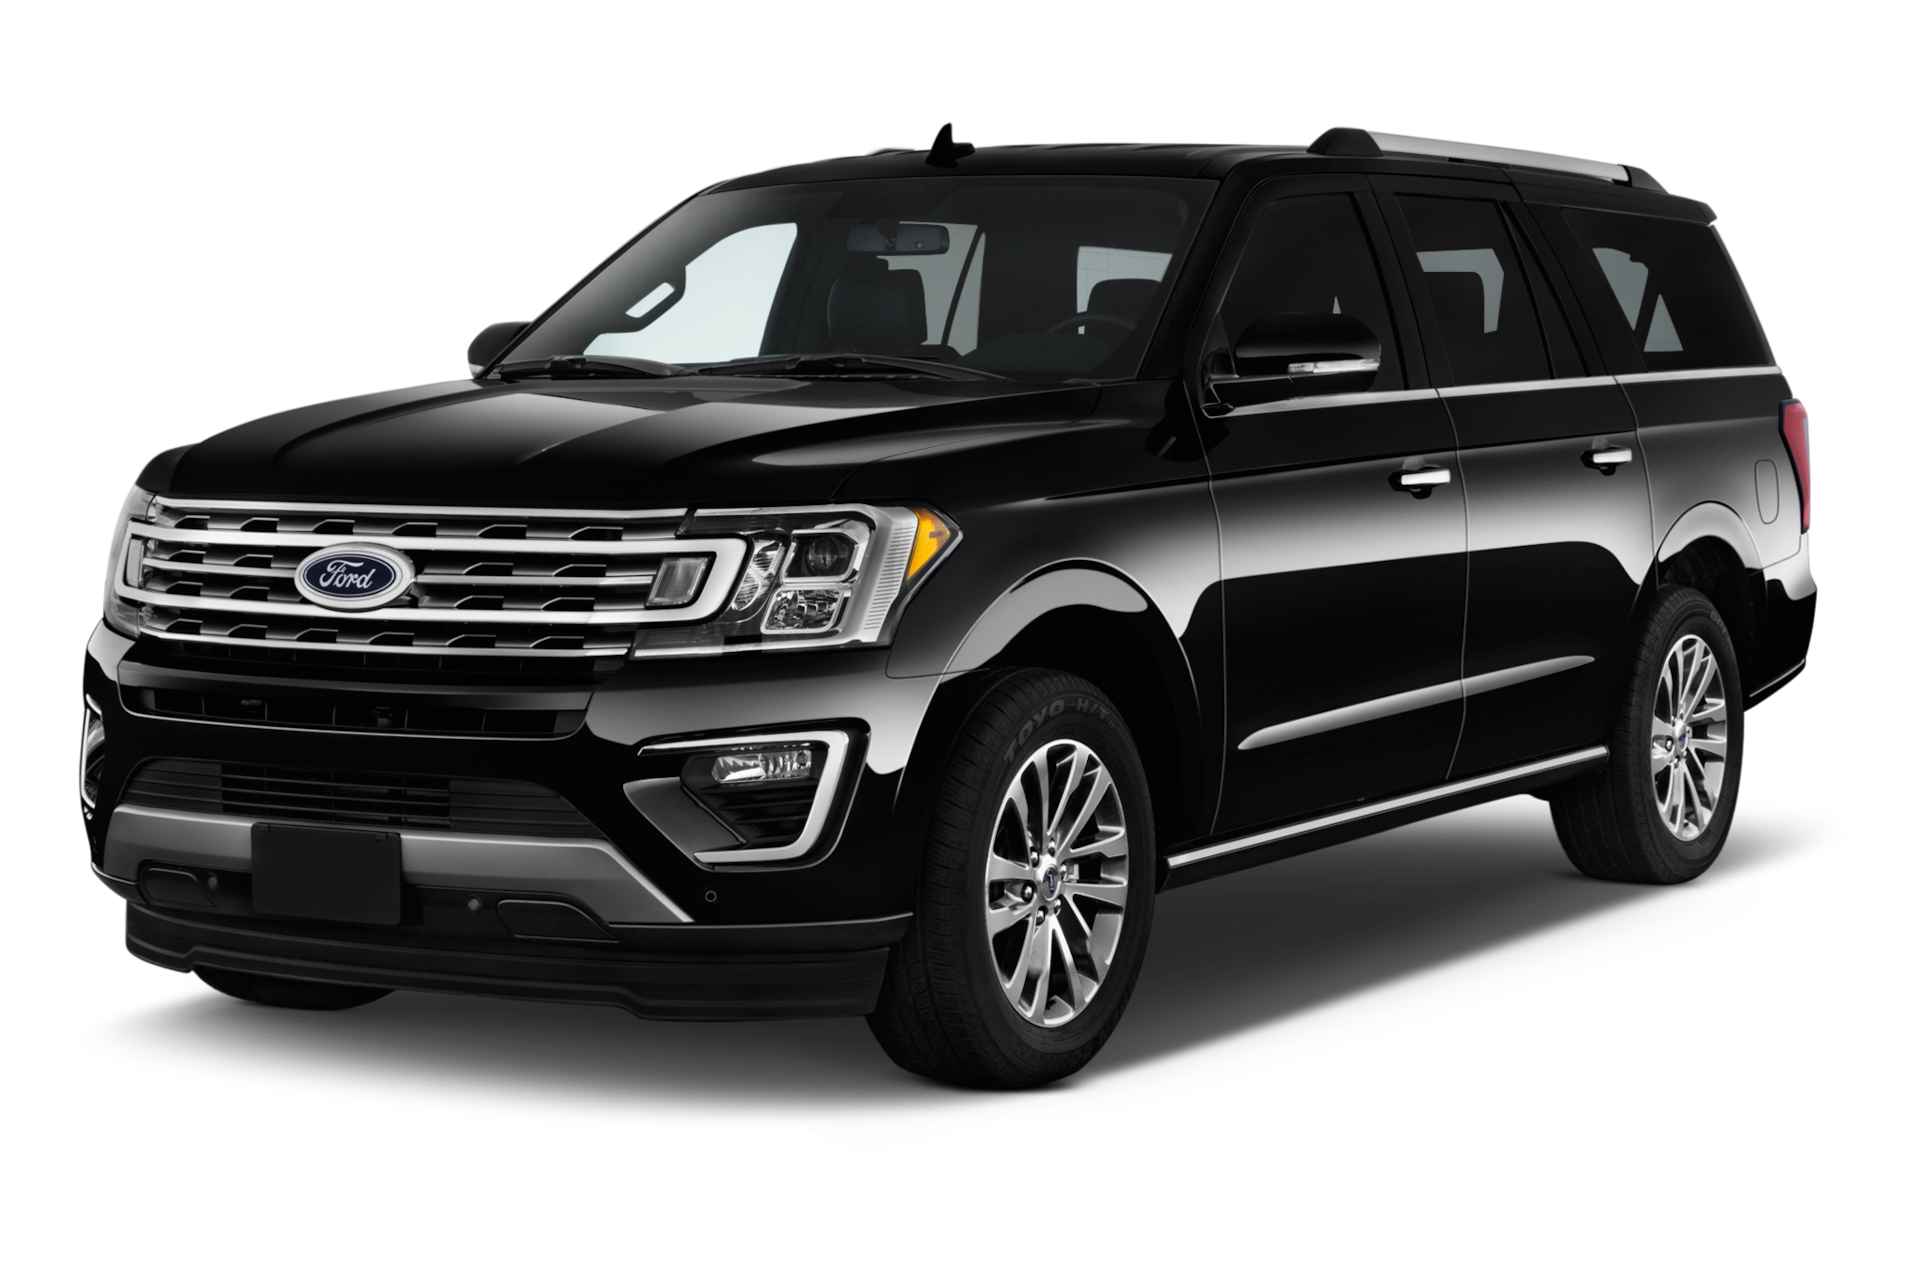 2019 Ford Expedition Prices, Reviews, and Photos - MotorTrend